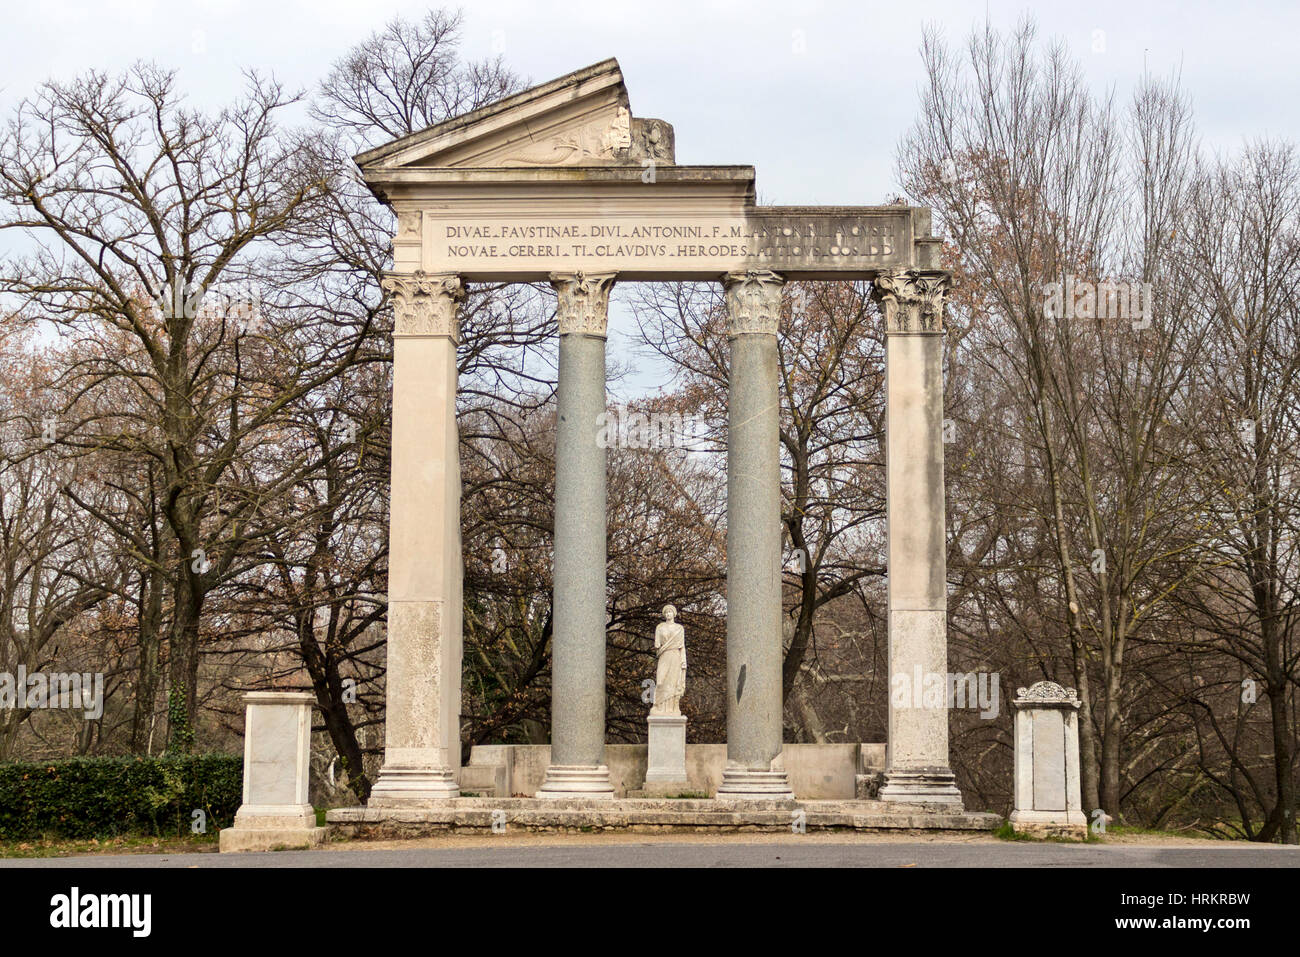 A view of the Divae Faustinae Divi Antonini Arch, Rome, Italy. Stock Photo